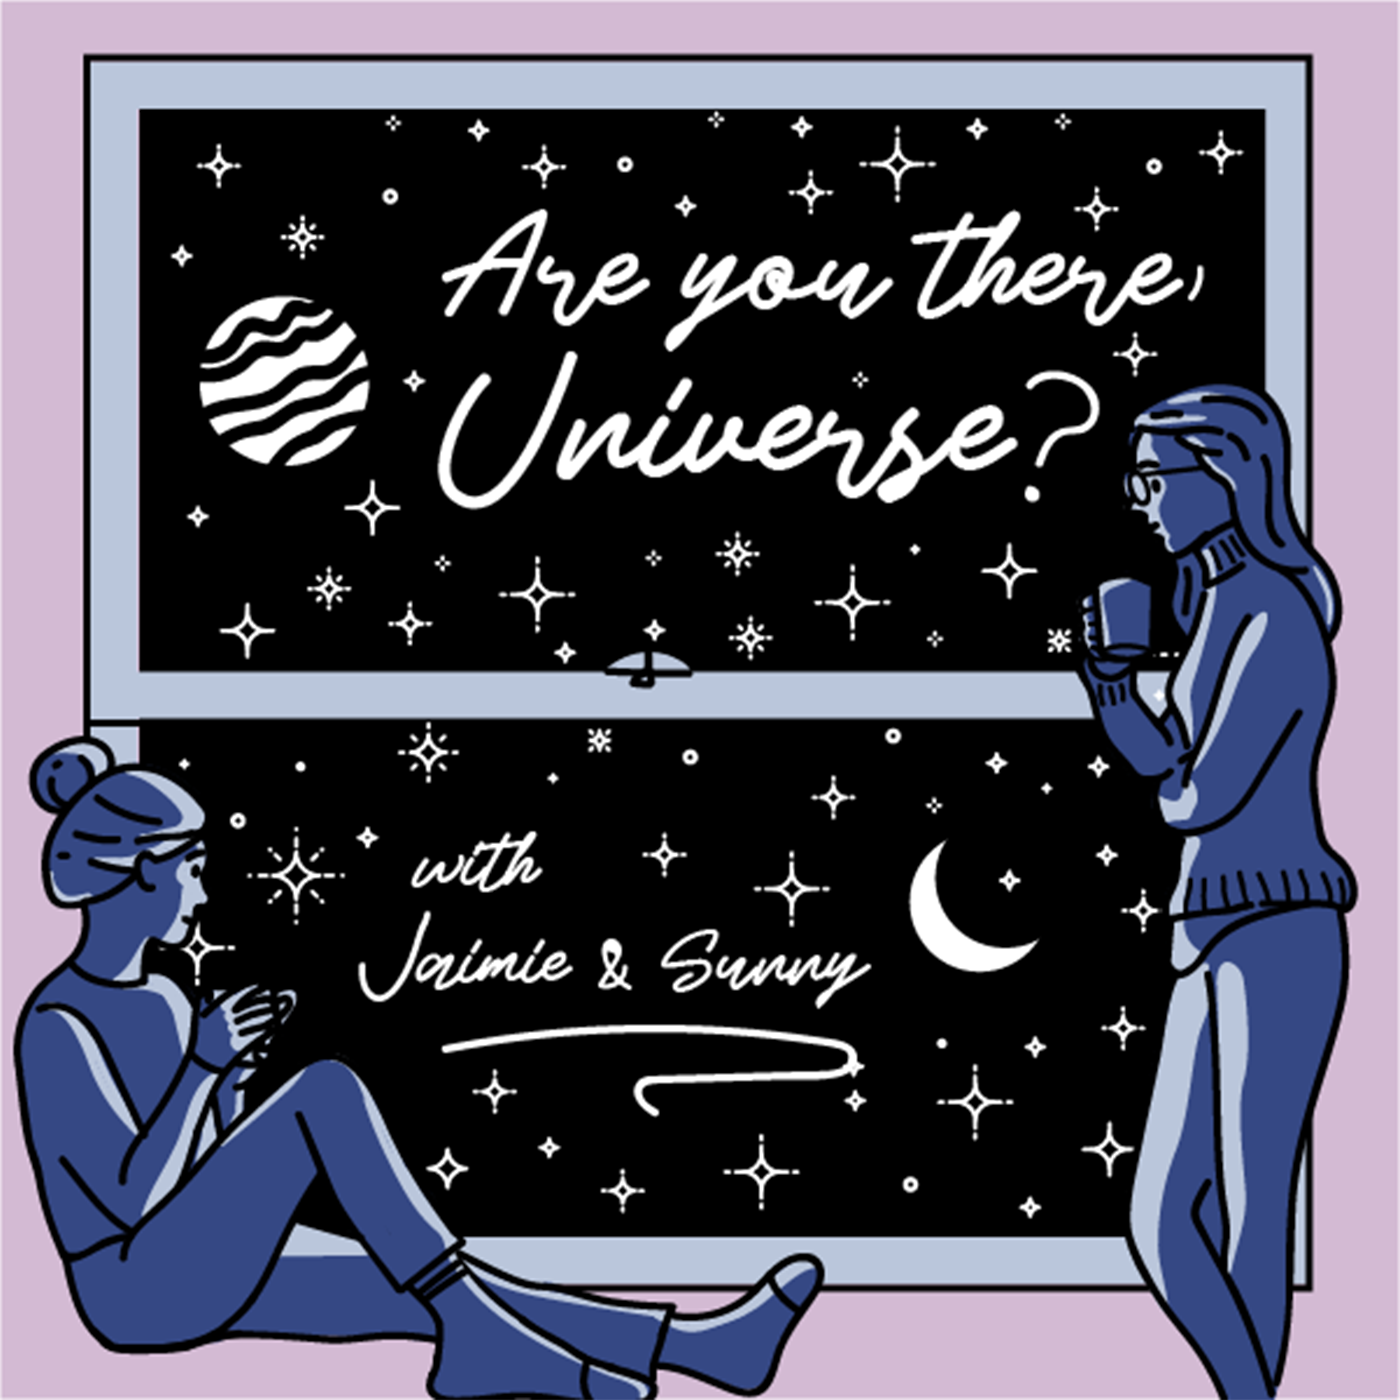 Are You There, Universe?